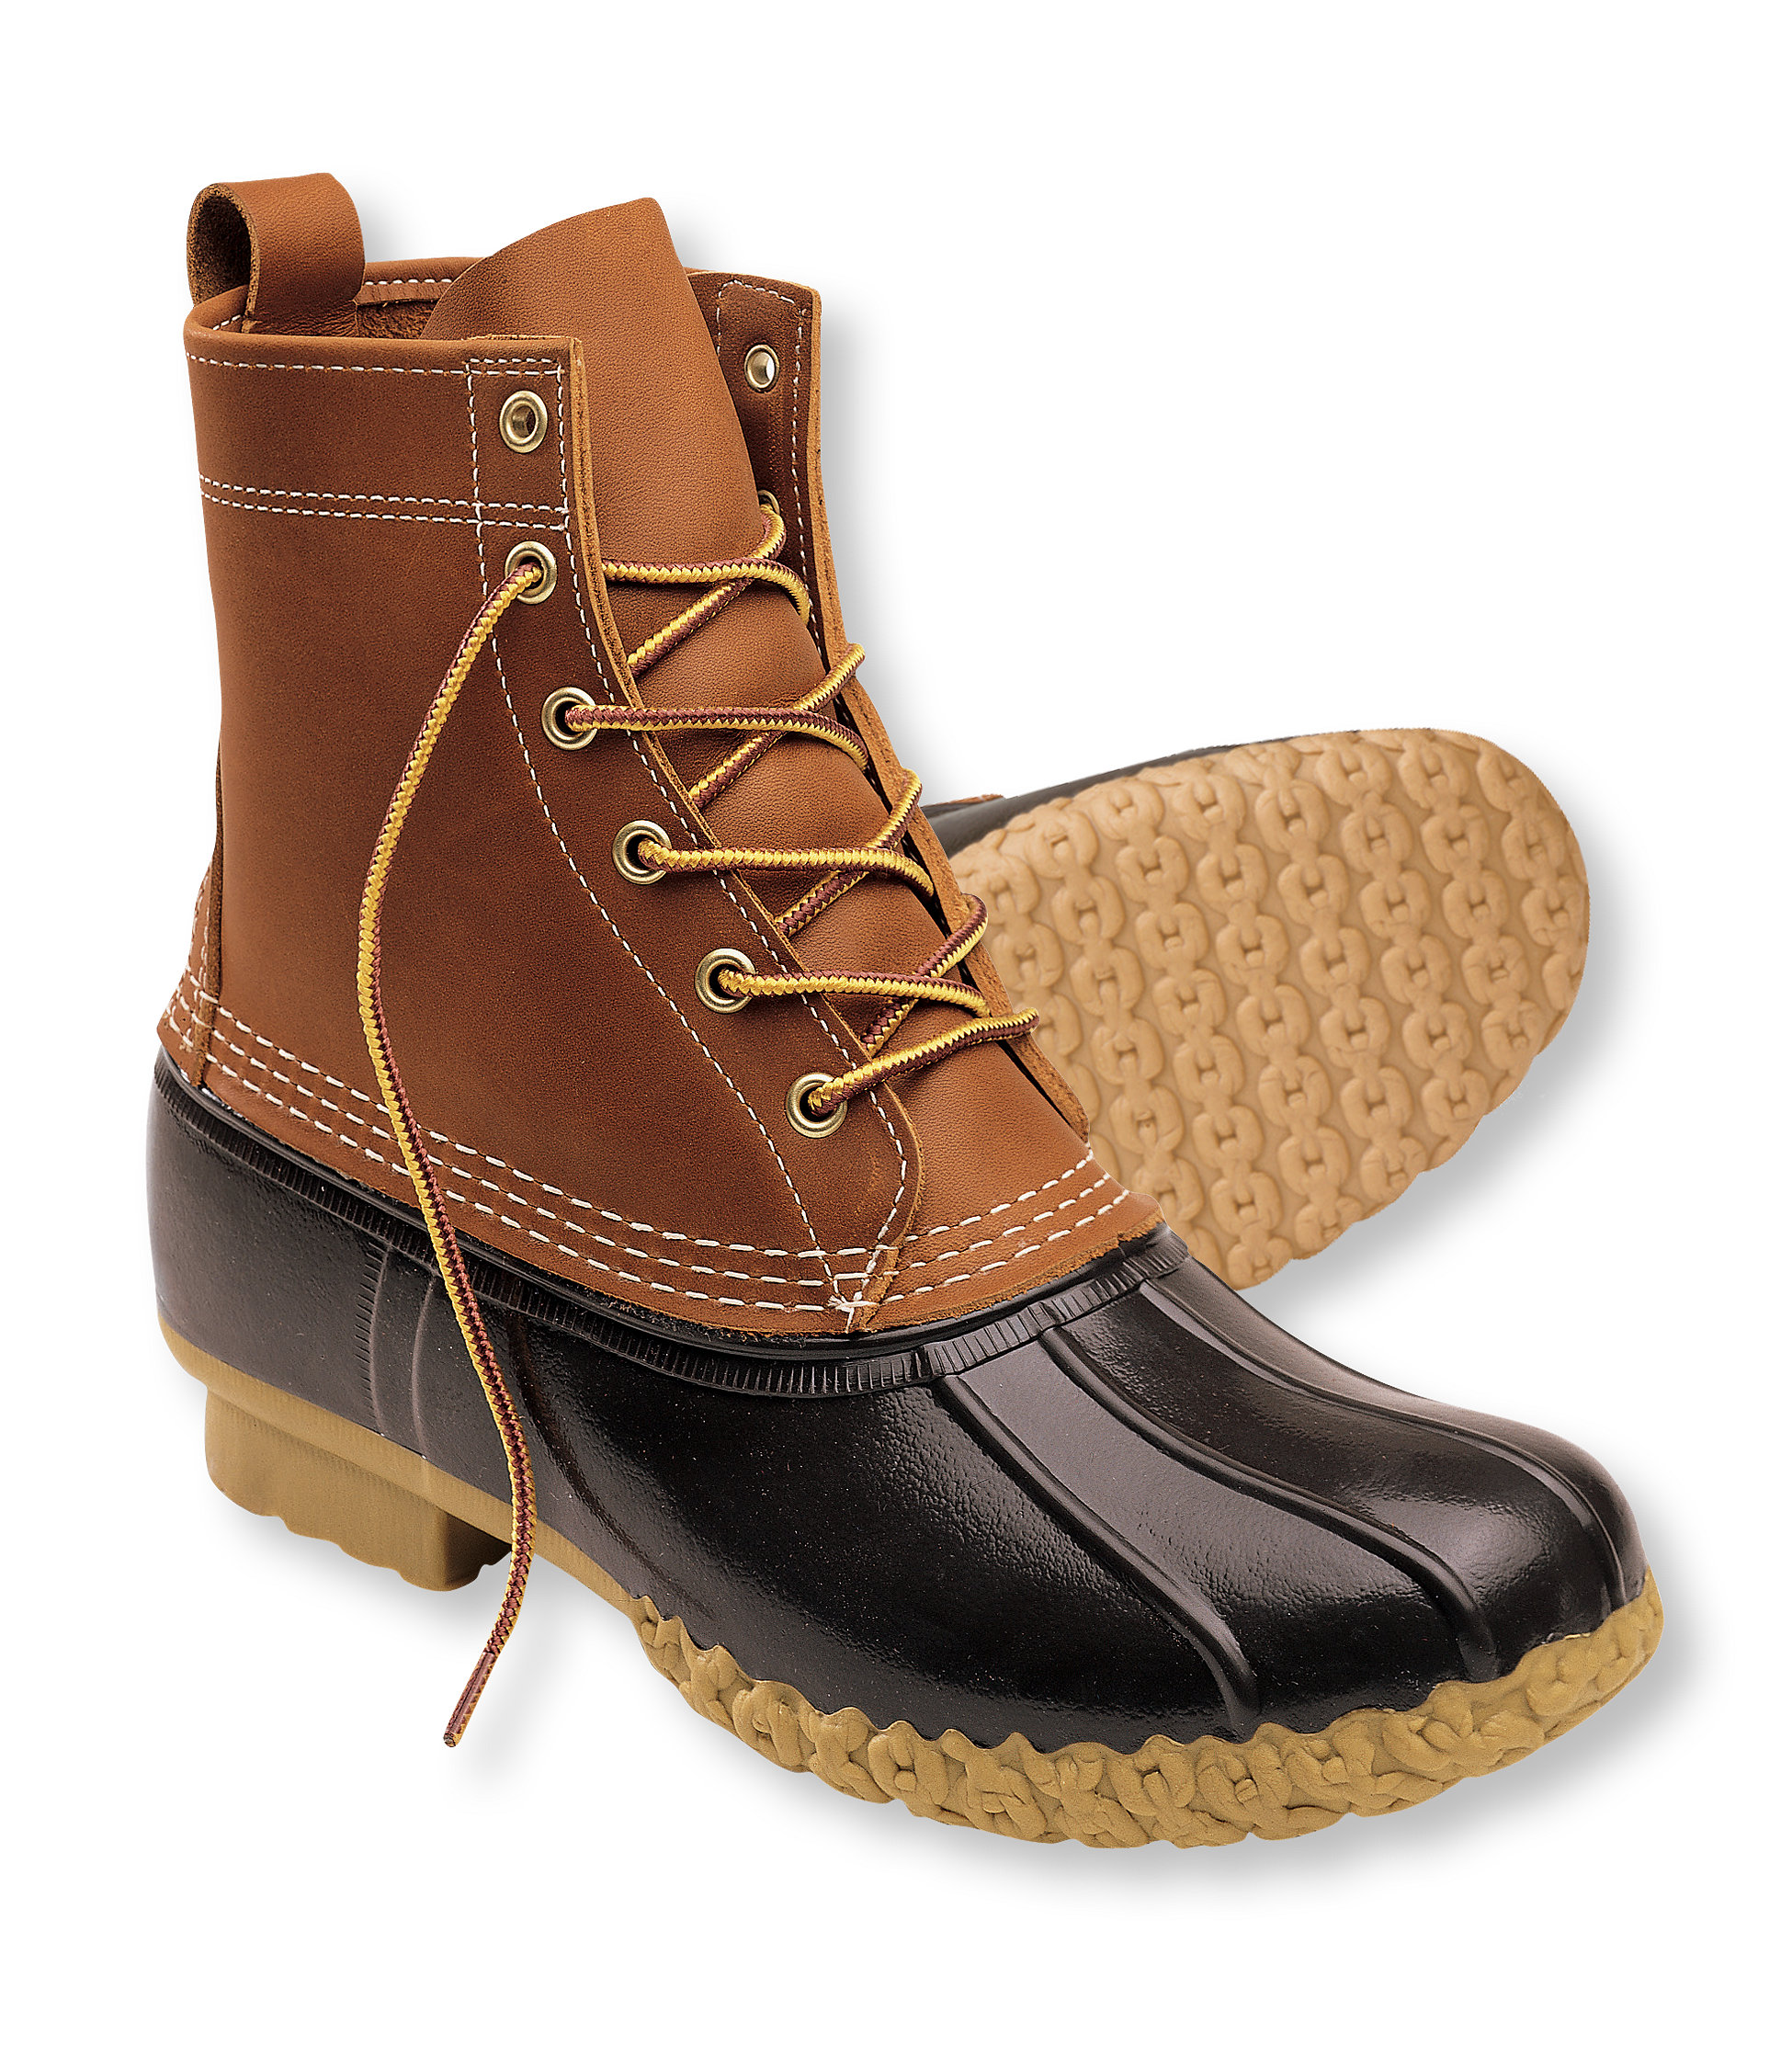 Men's Winter Boots Made in USA